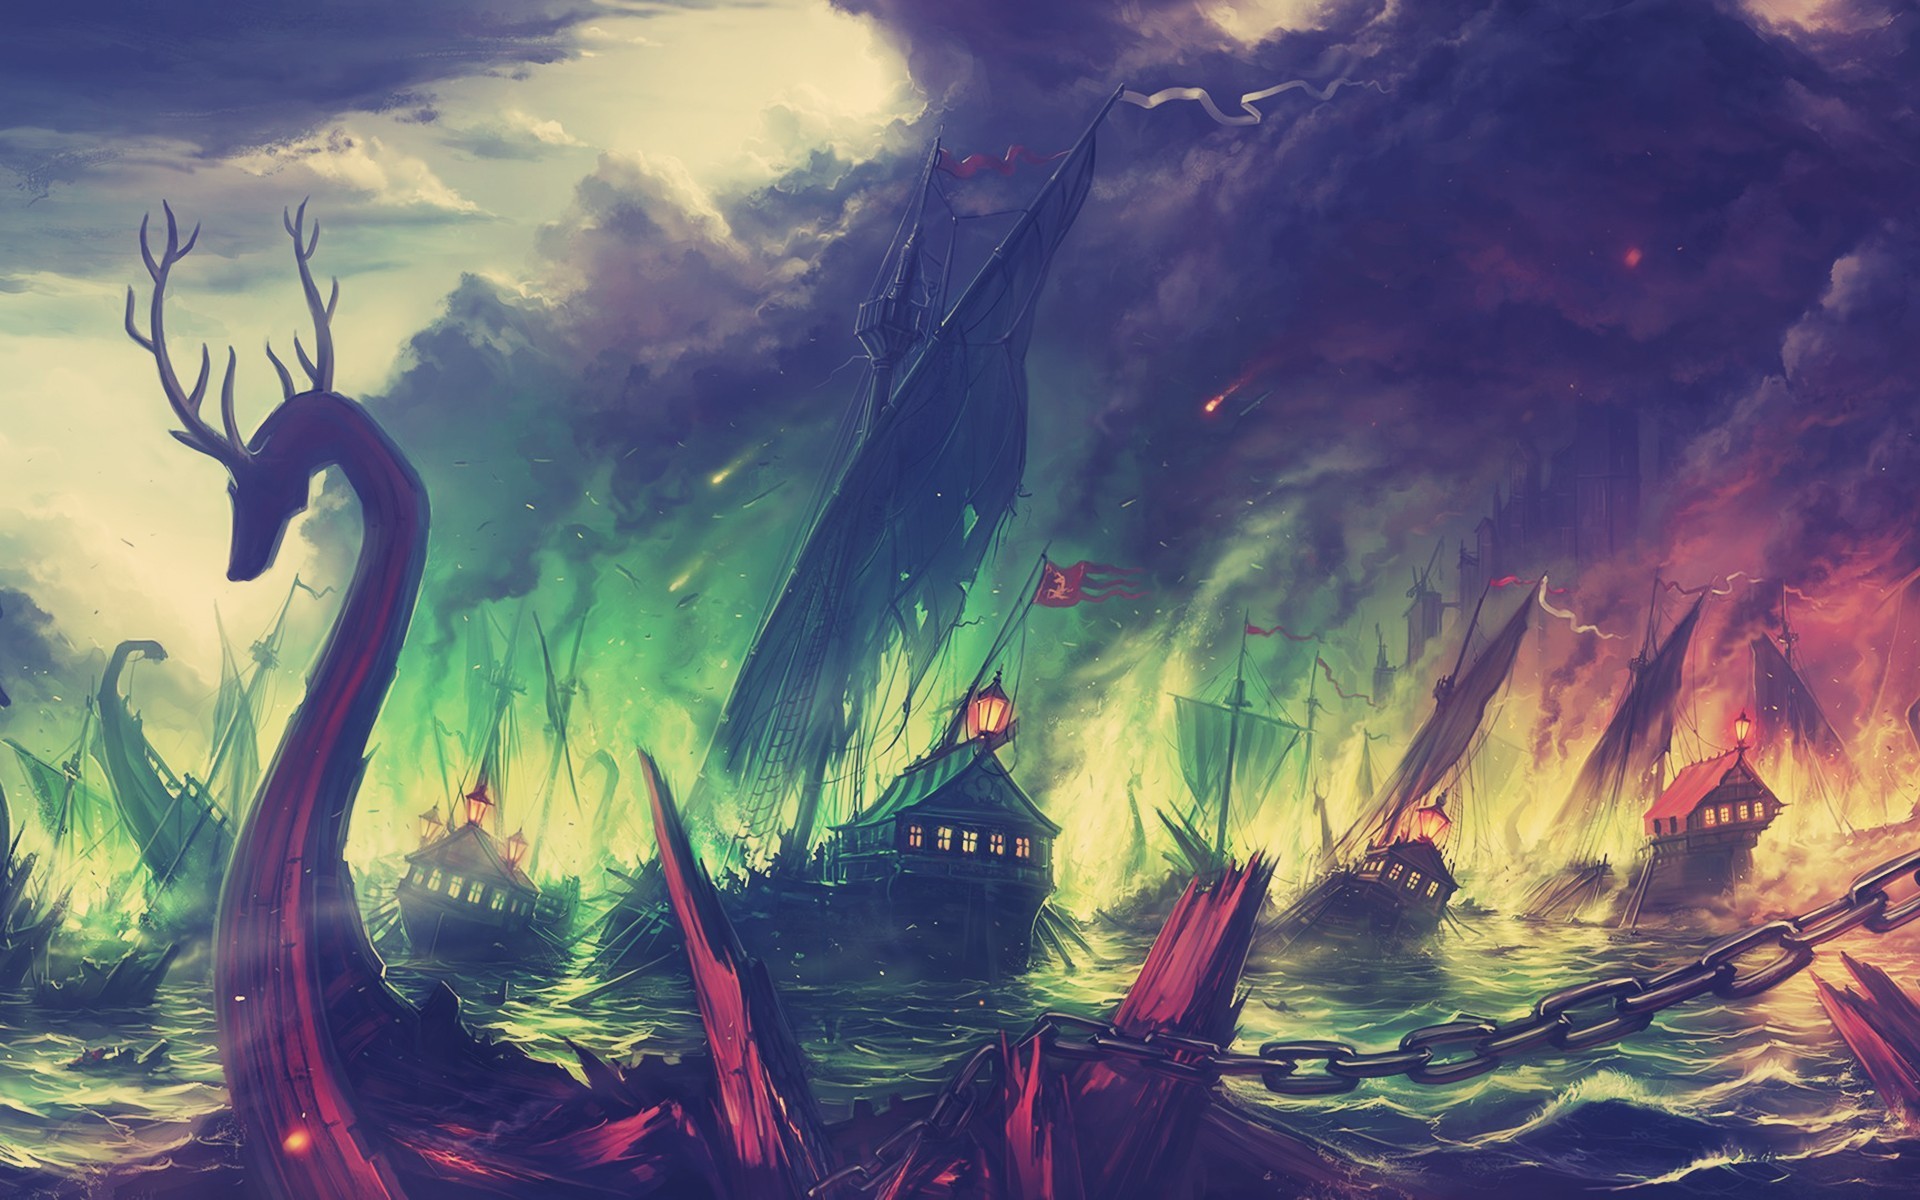 General 1920x1200 Game of Thrones ship artwork battle fantasy art Blackwater fire boat colorful mountains landscape fall House Baratheon TV series shipwreck